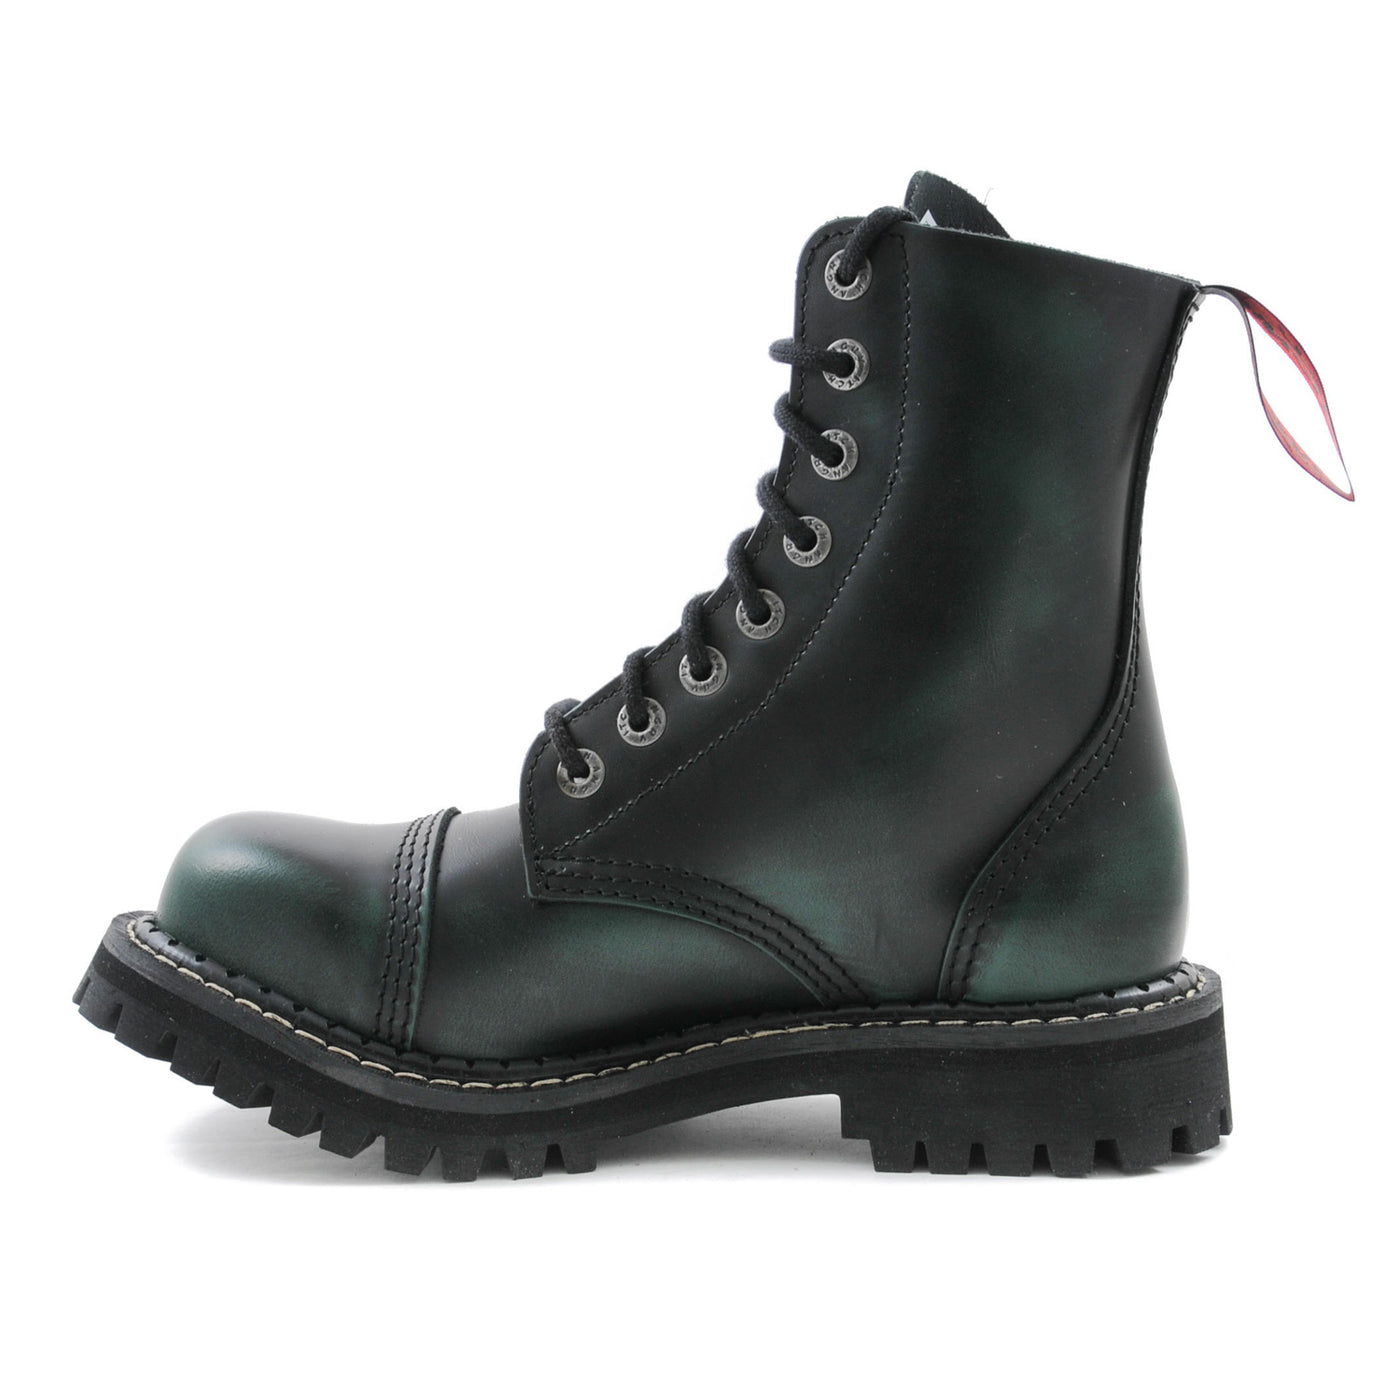 Angry Itch 8 Eyelet Boots with Steel Toe Cap Green Rub Off Leather